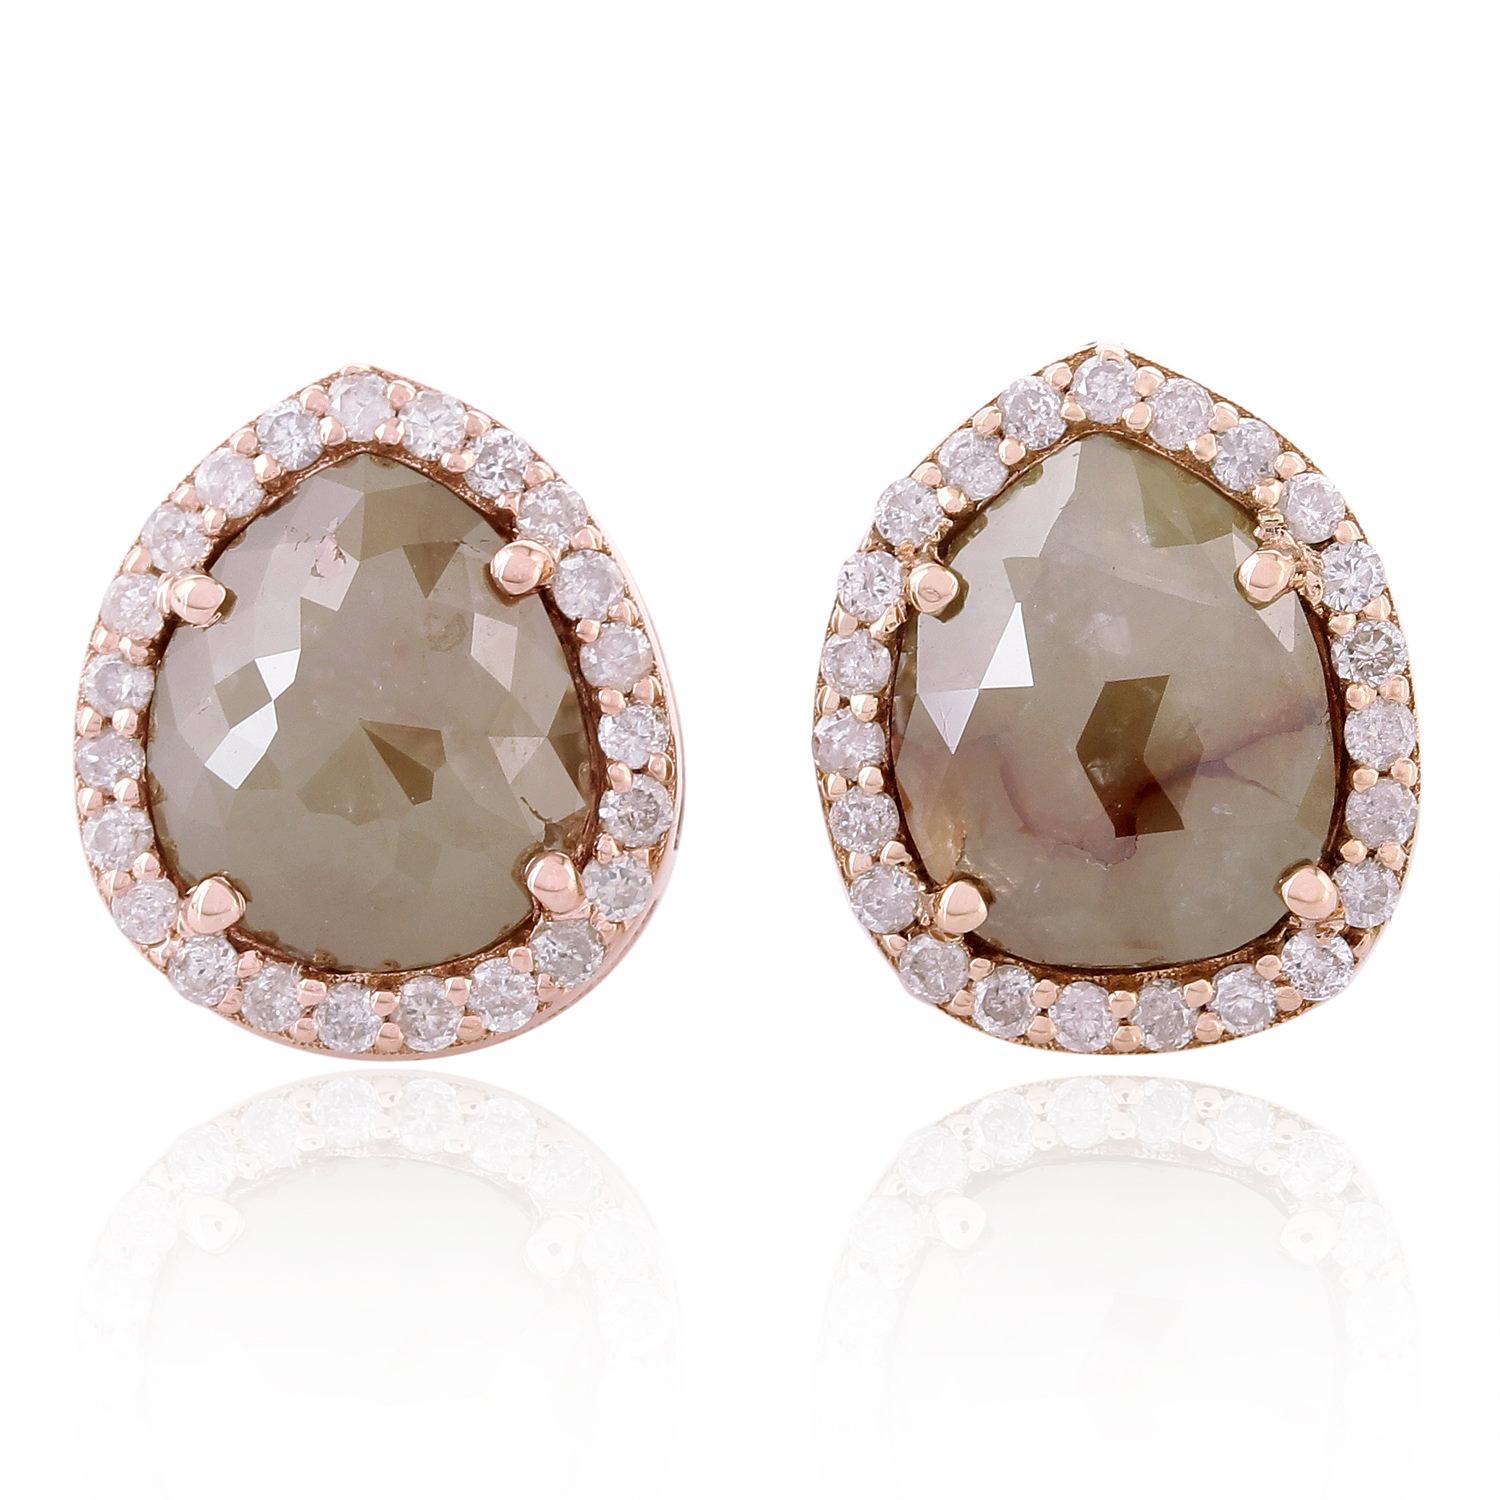 Round Cut Ice Diamond Studs With Pave Diamonds Made in 18k Gold For Sale